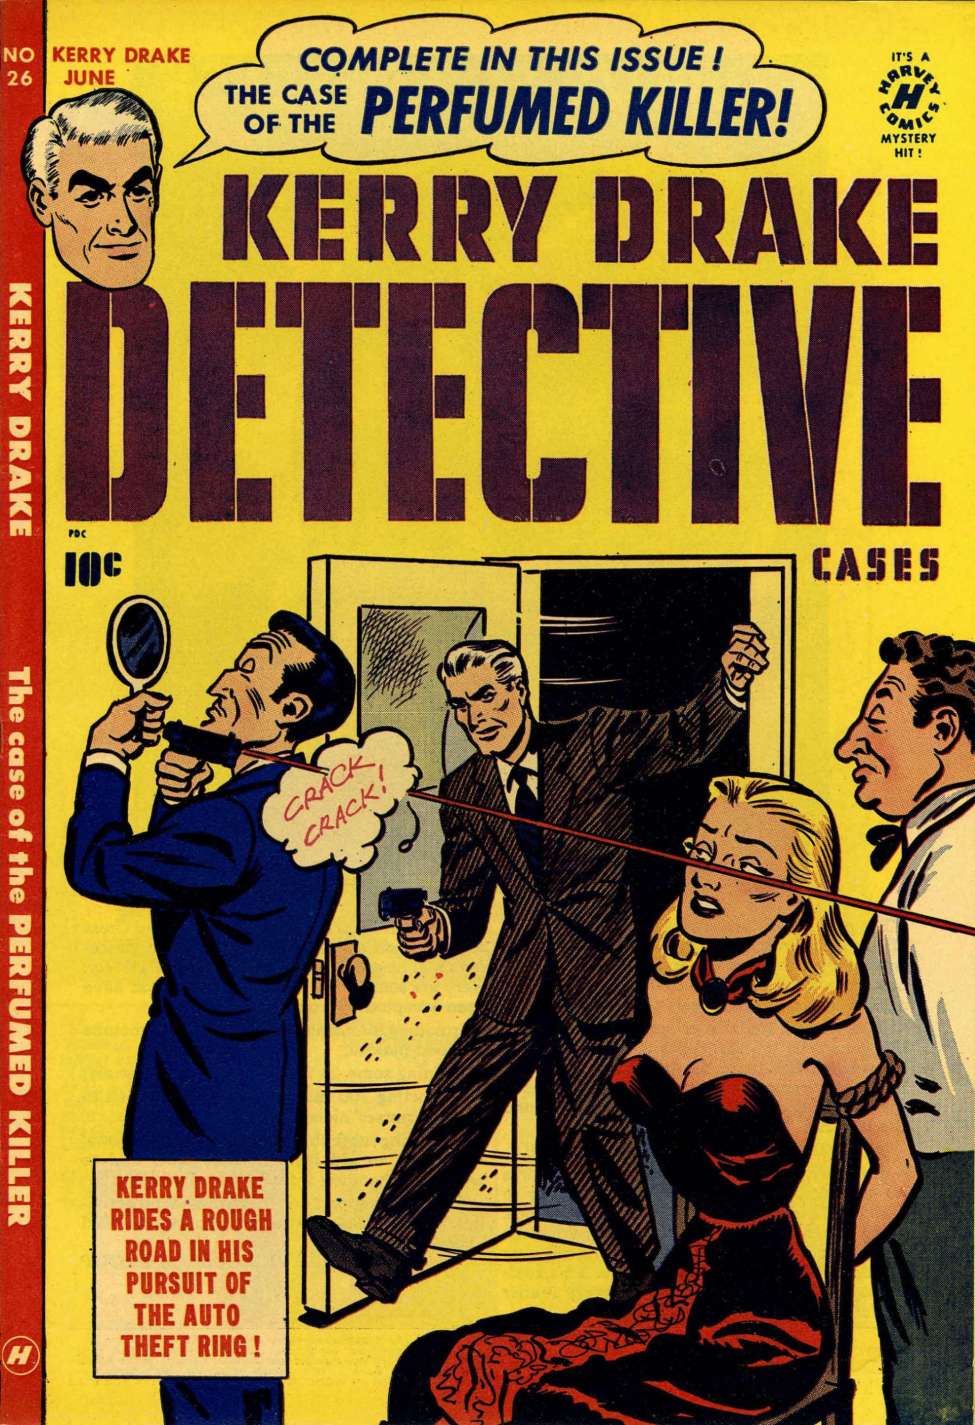 Book Cover For Kerry Drake Detective Cases 26 - Version 2